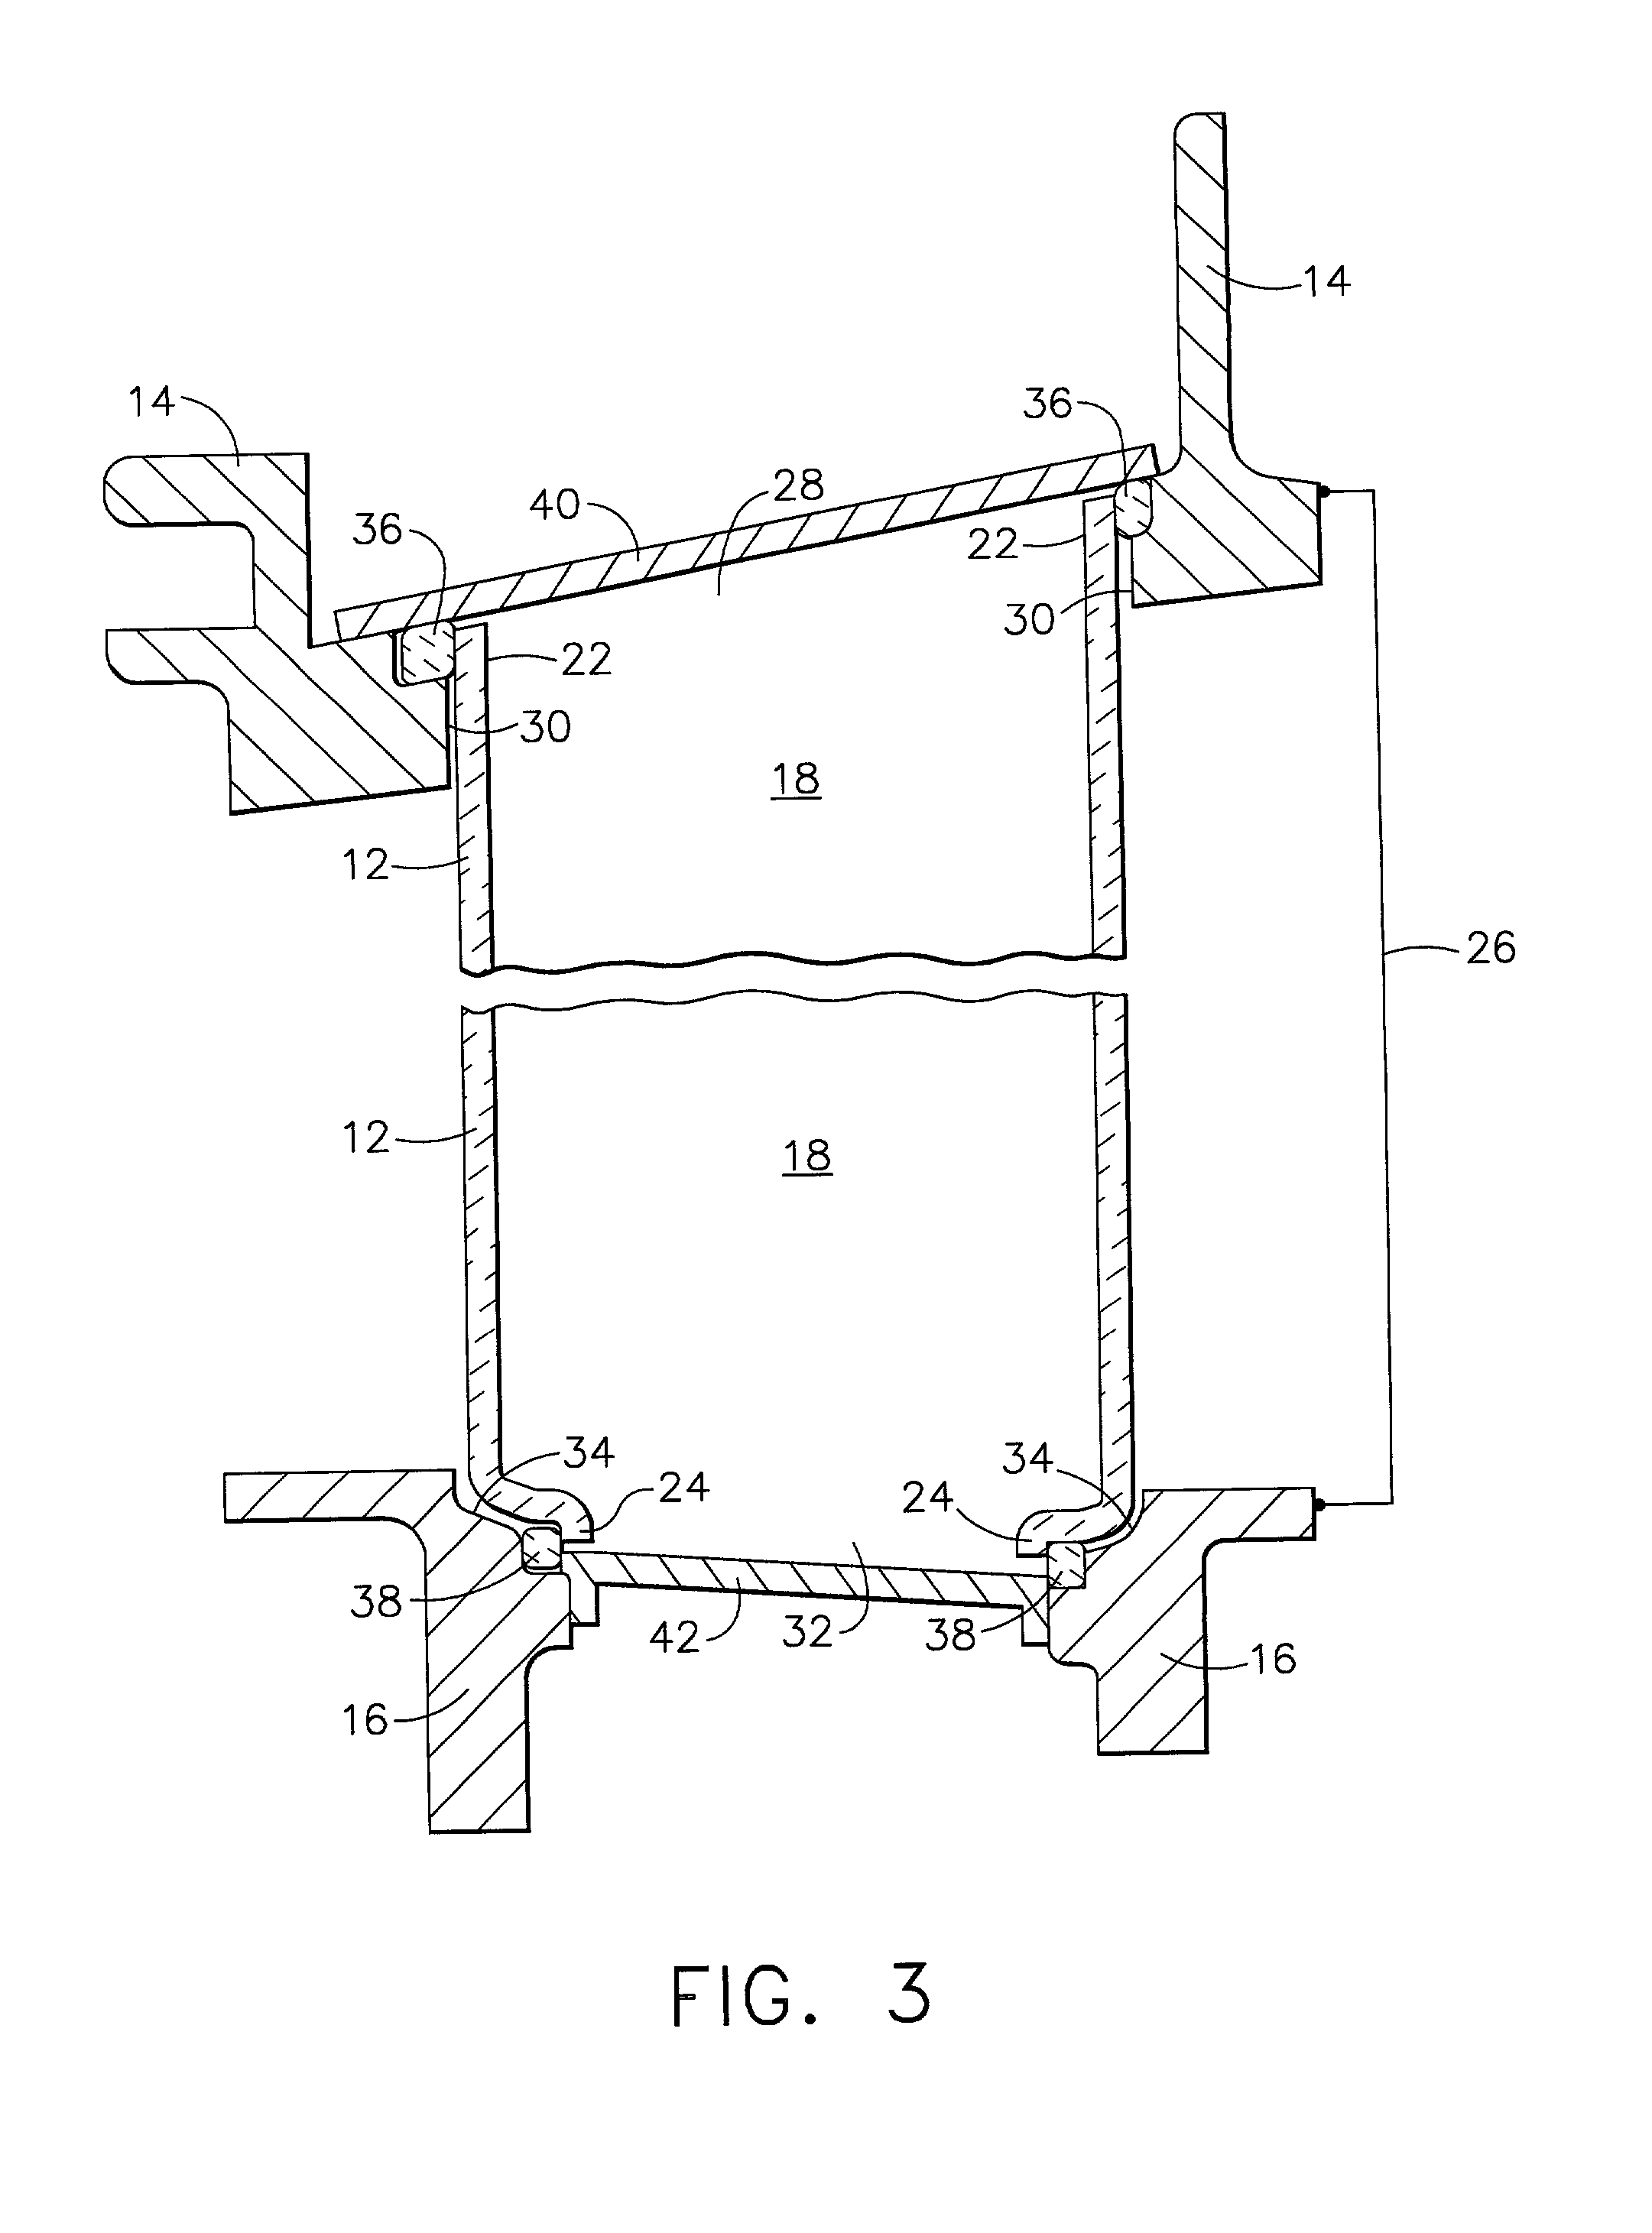 Turbine vane assembly including a low ductility vane